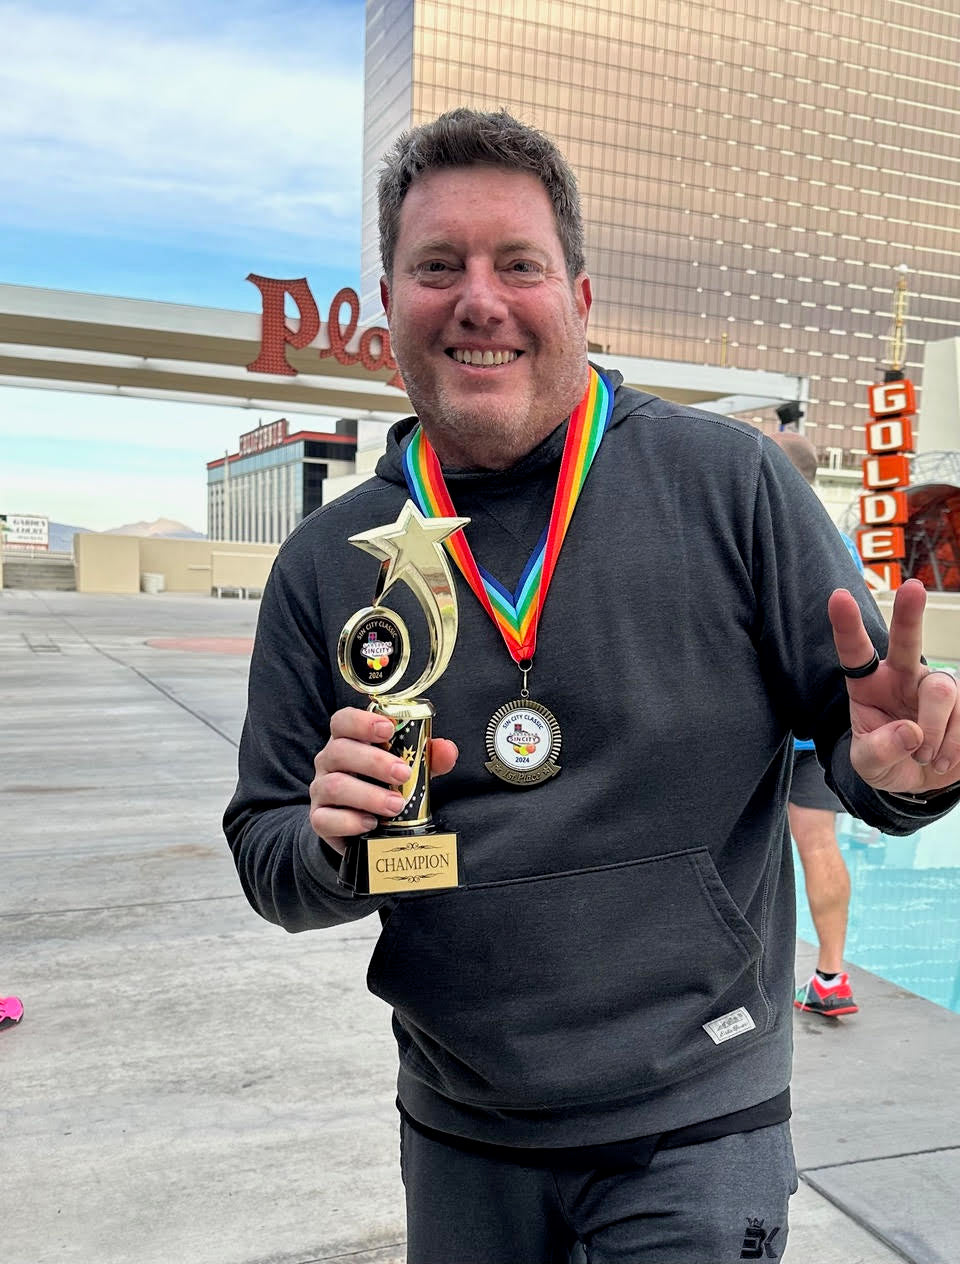 Jonathan Stone holds up a trophy in Las Vegas. He has a gold medal and is smiling at the camera.